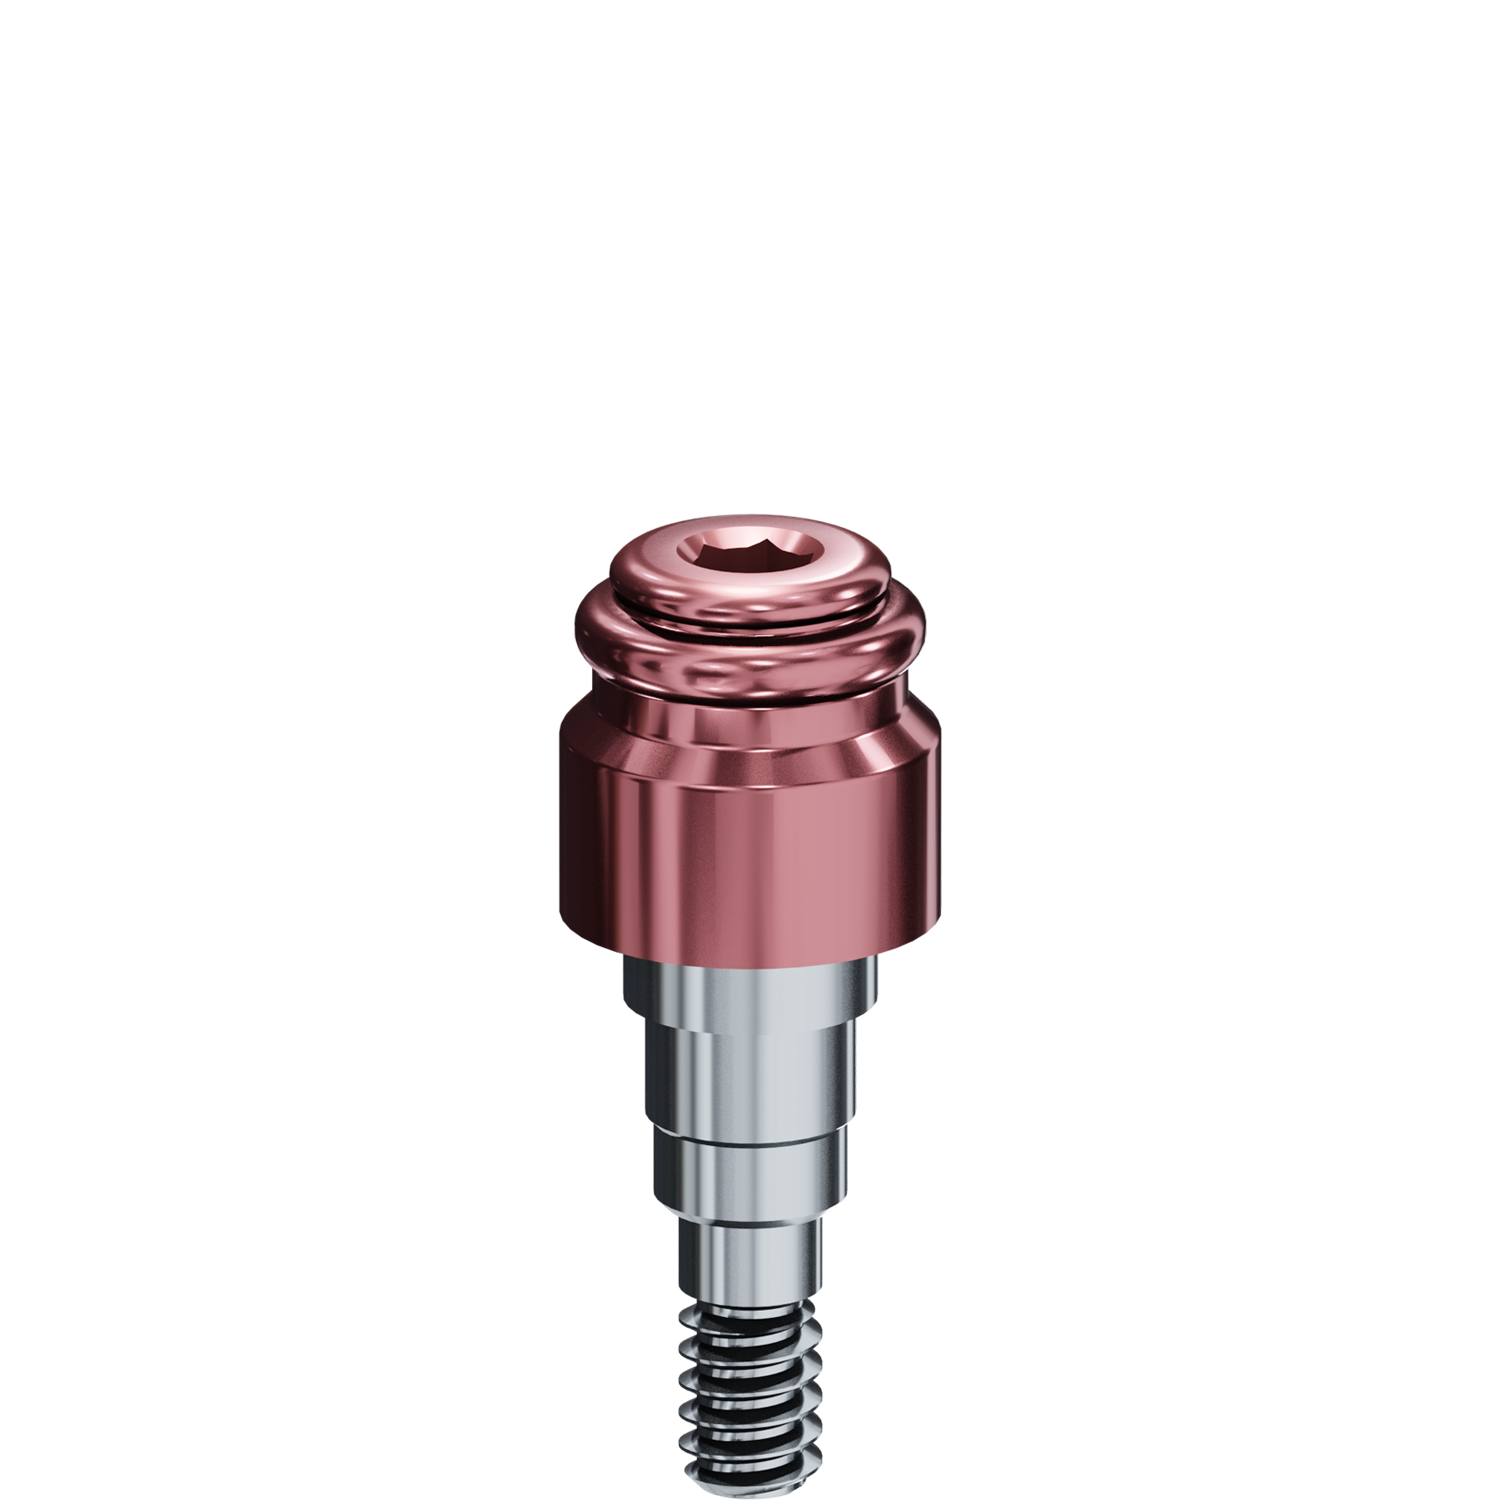 R-Tx Attachment System - Biomet 3i® - 4.1mm Certain Connection - 0.048" Drive - 3.0mm